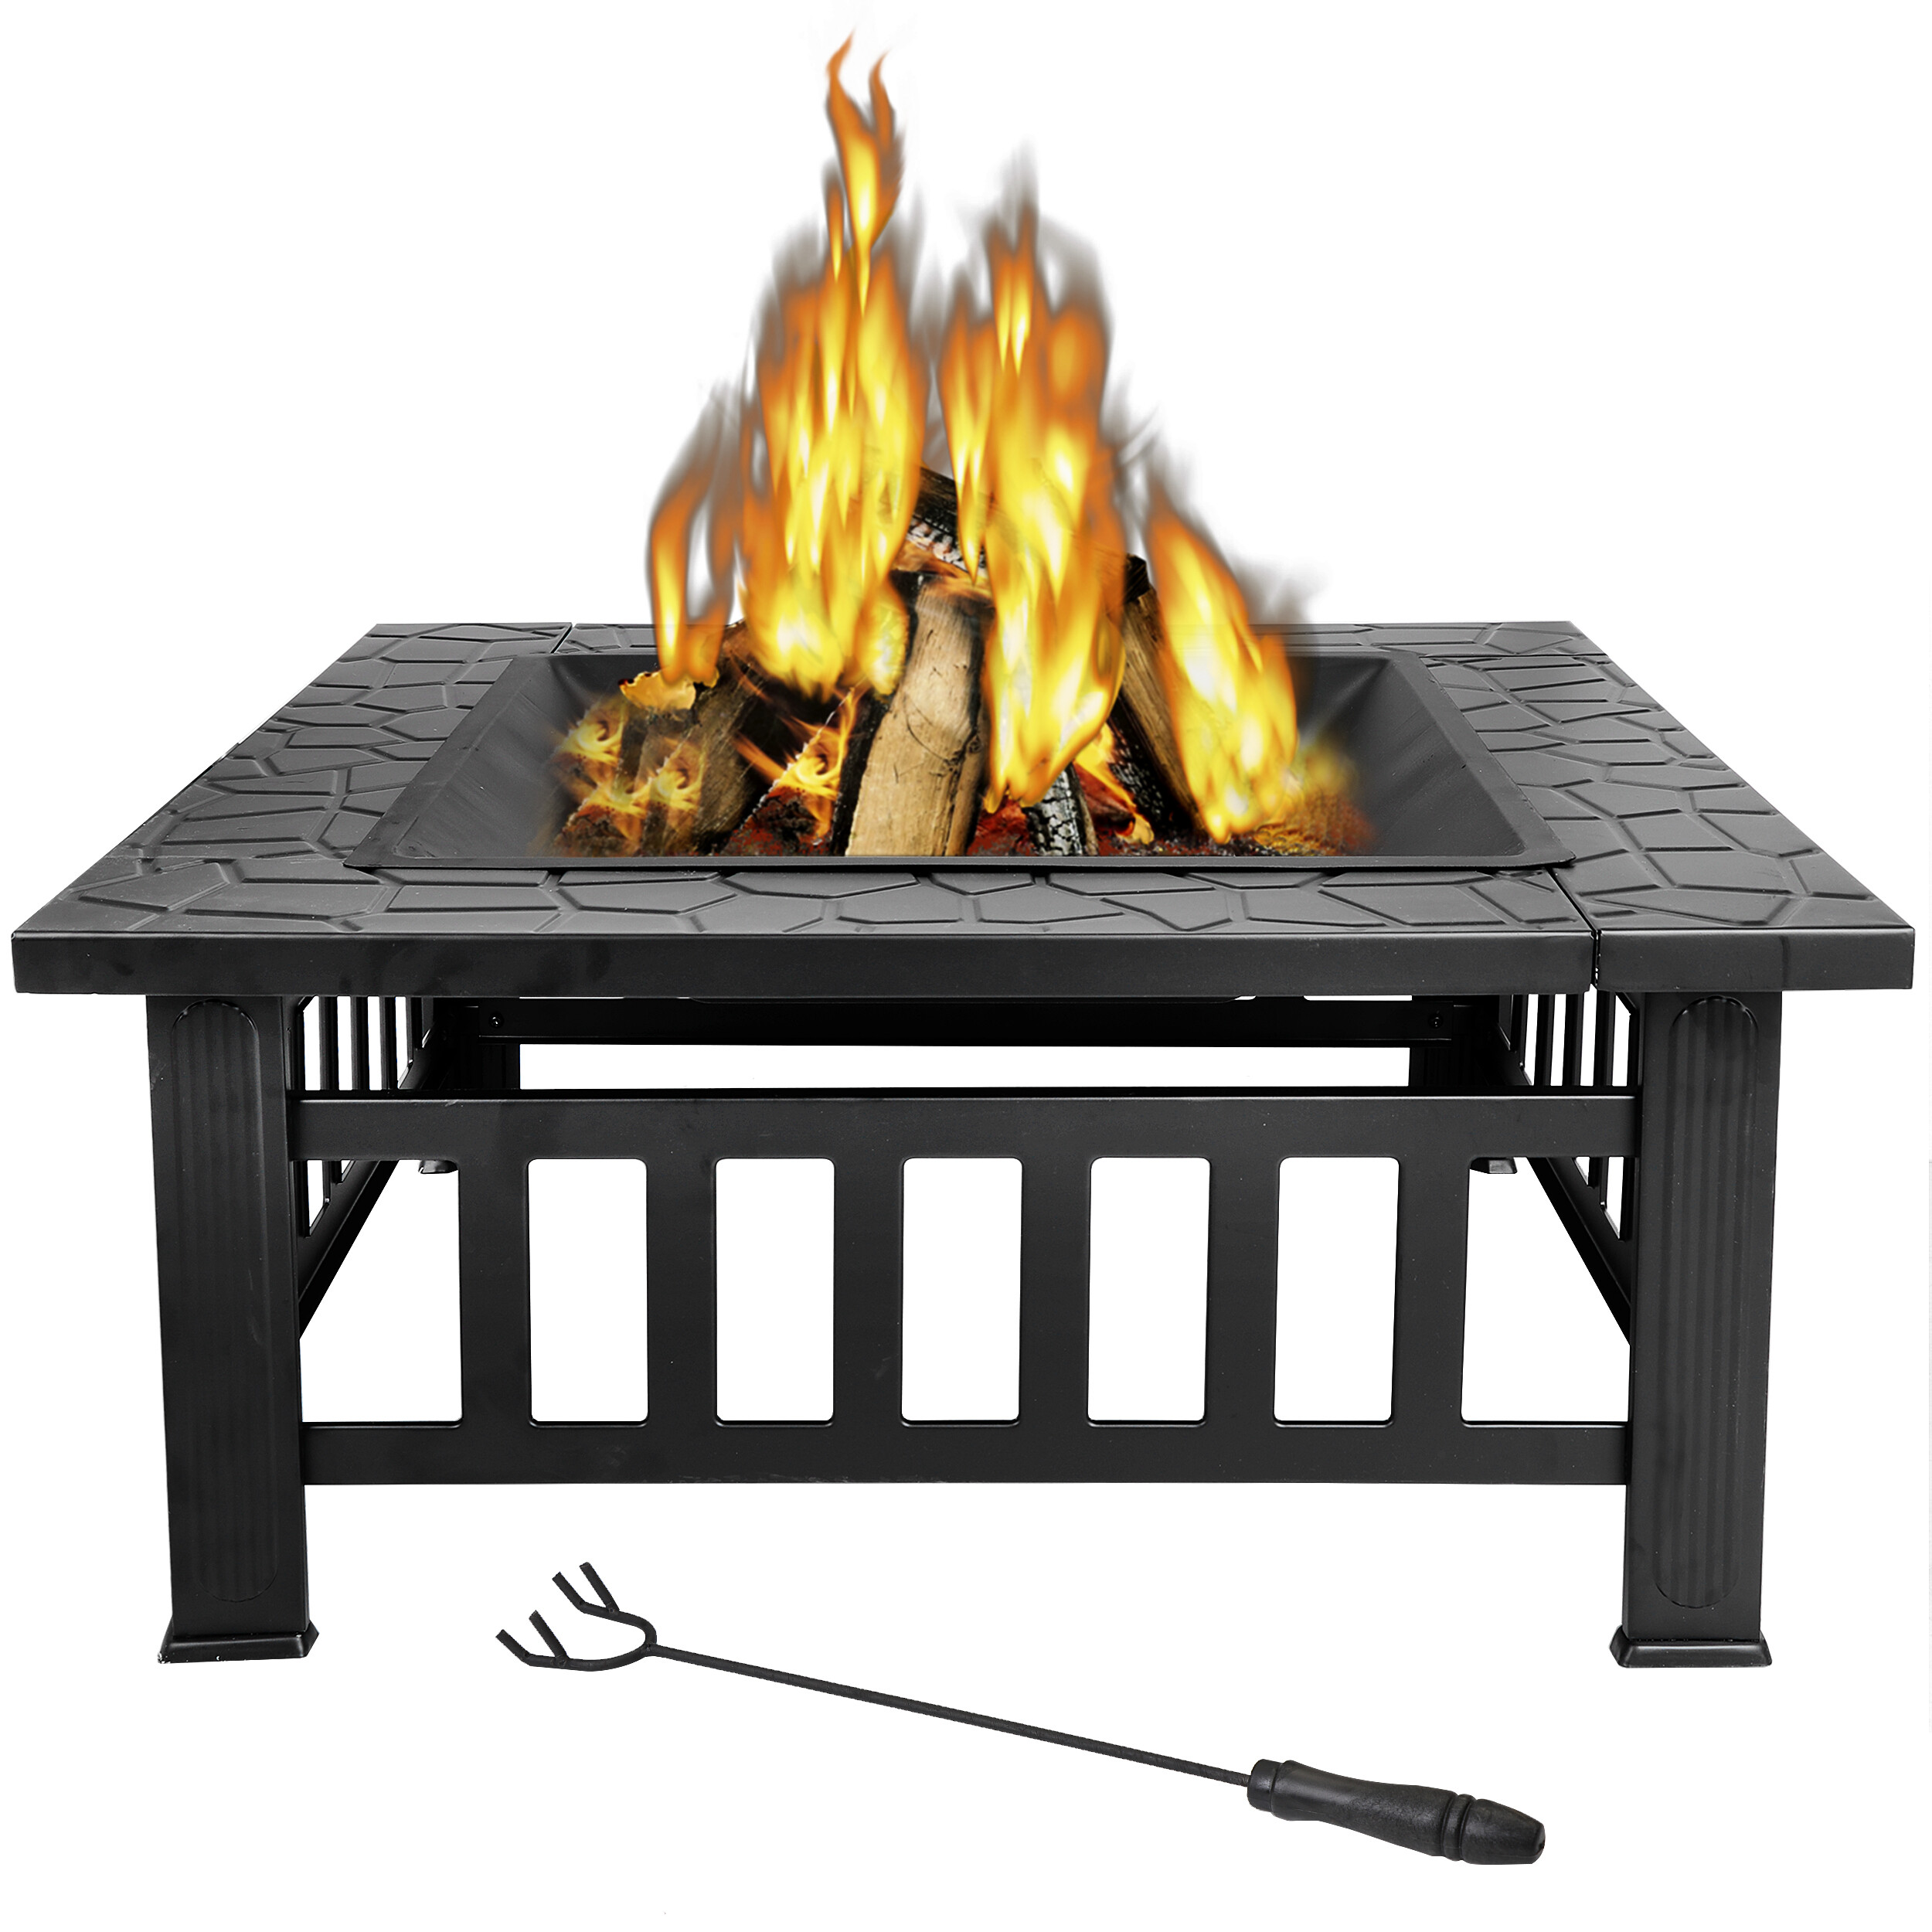 ZENY 32" Outdoor Fire Pit Square Metal Firepit Patio Garden Stove Wood Burning - image 5 of 12